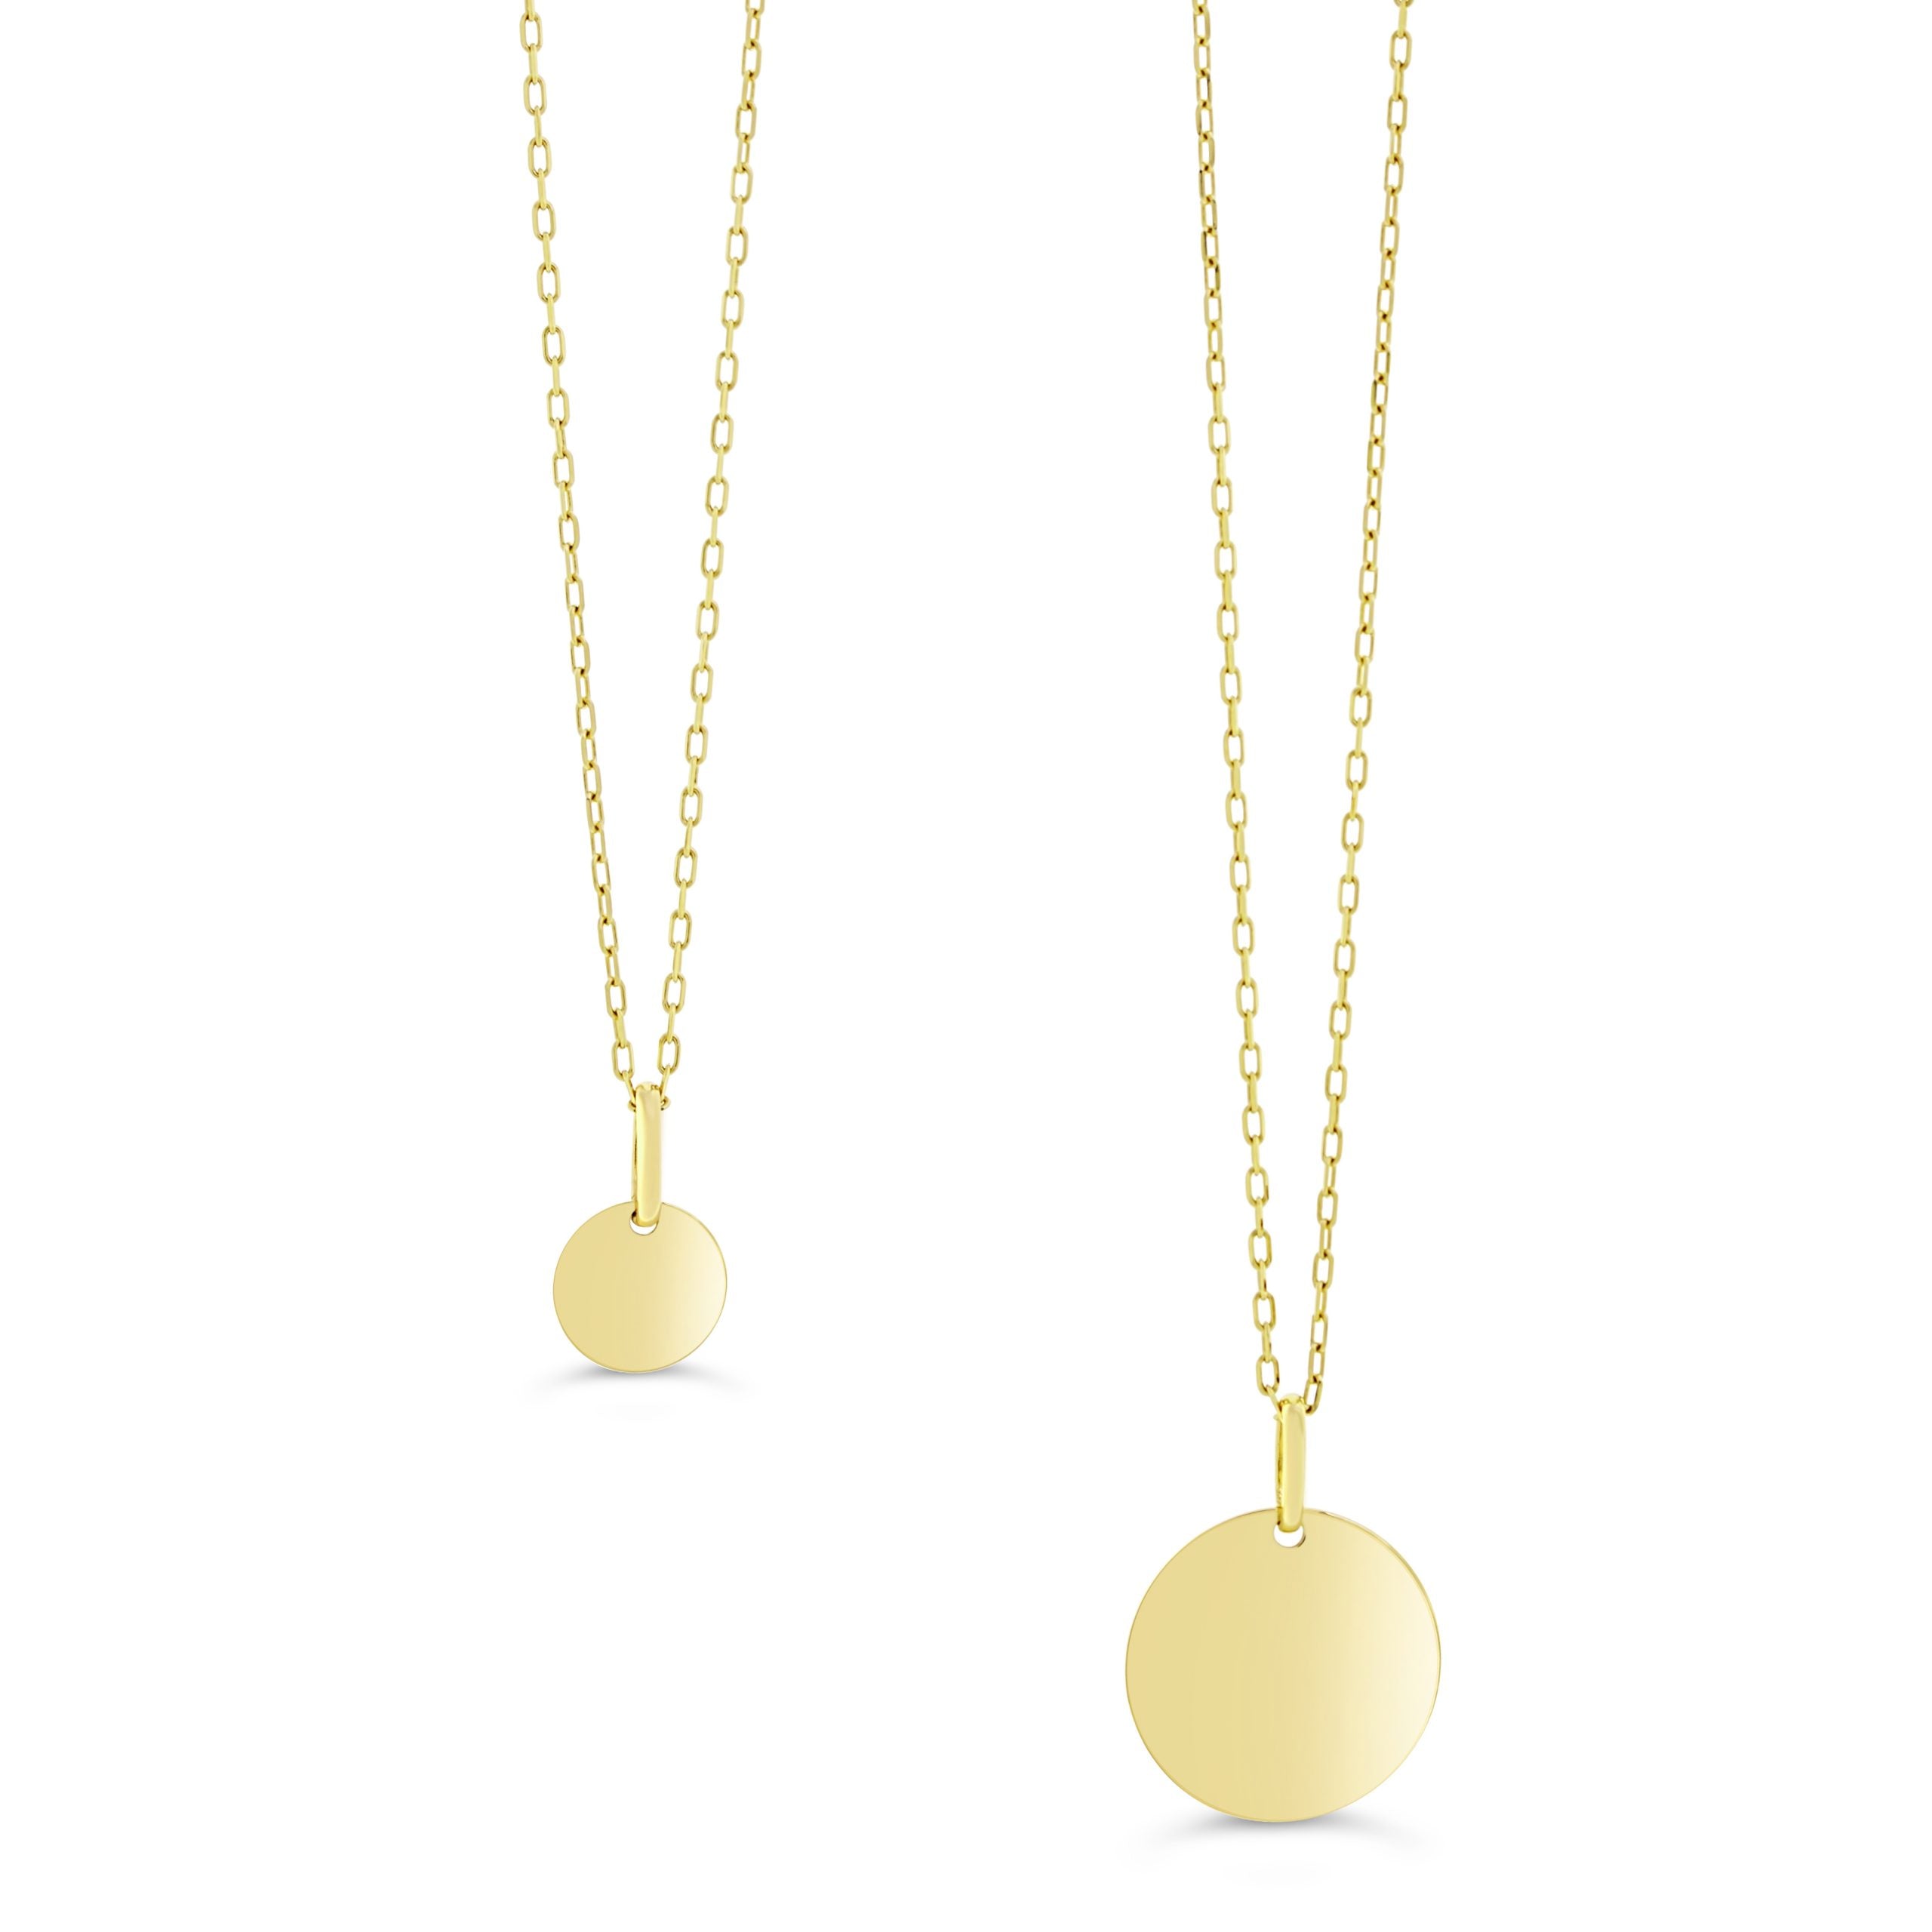 10K Yellow Gold Disk Necklace